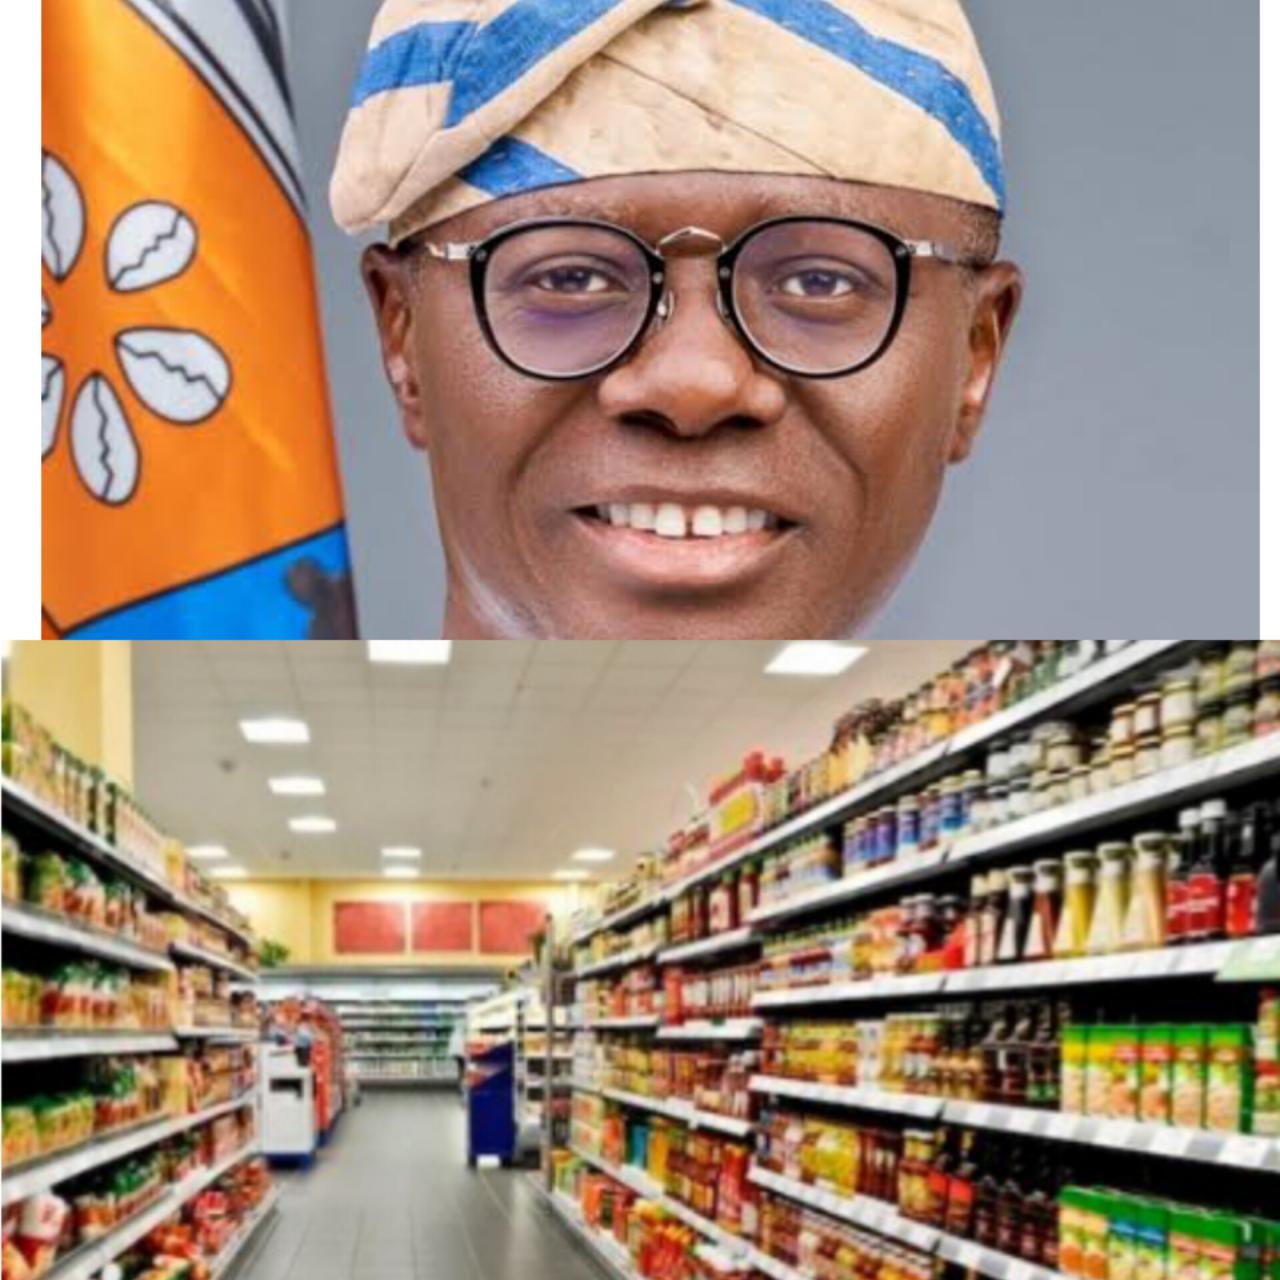 Lagos state threatens to seal supermarkets over non-disclosure of price tags on products